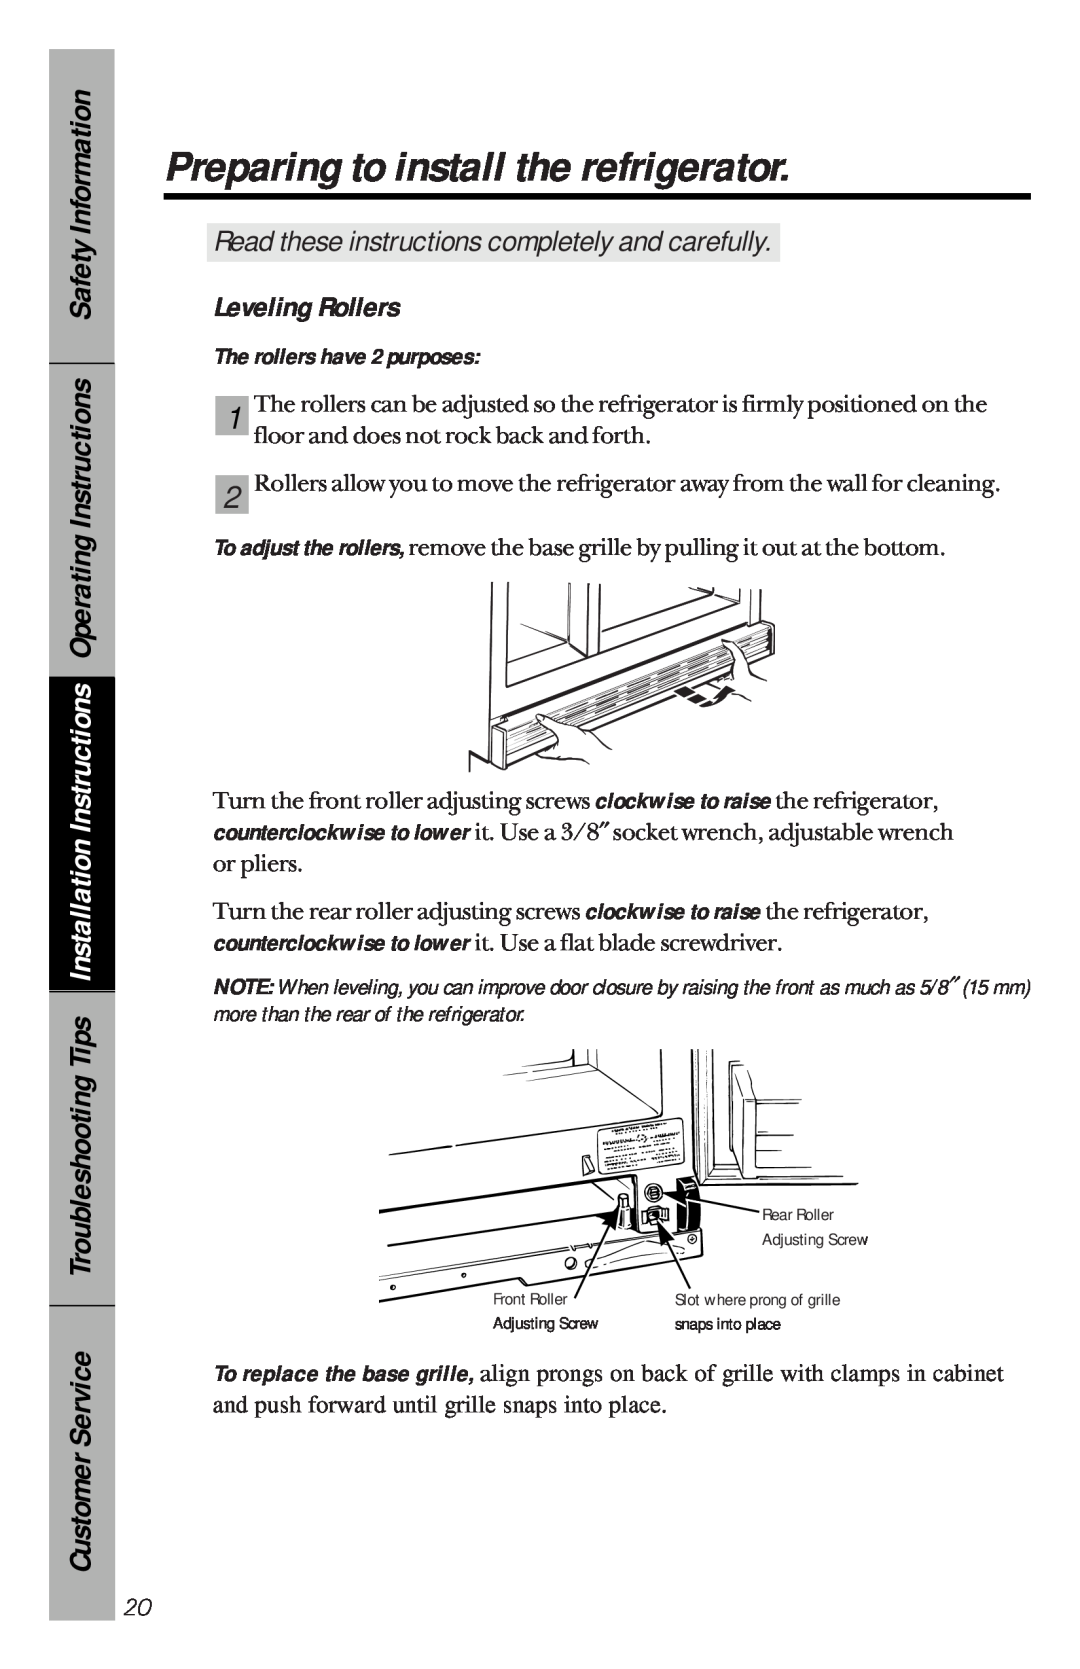 GE 162D3941P005 Leveling Rollers, Preparing to install the refrigerator, Read these instructions completely and carefully 